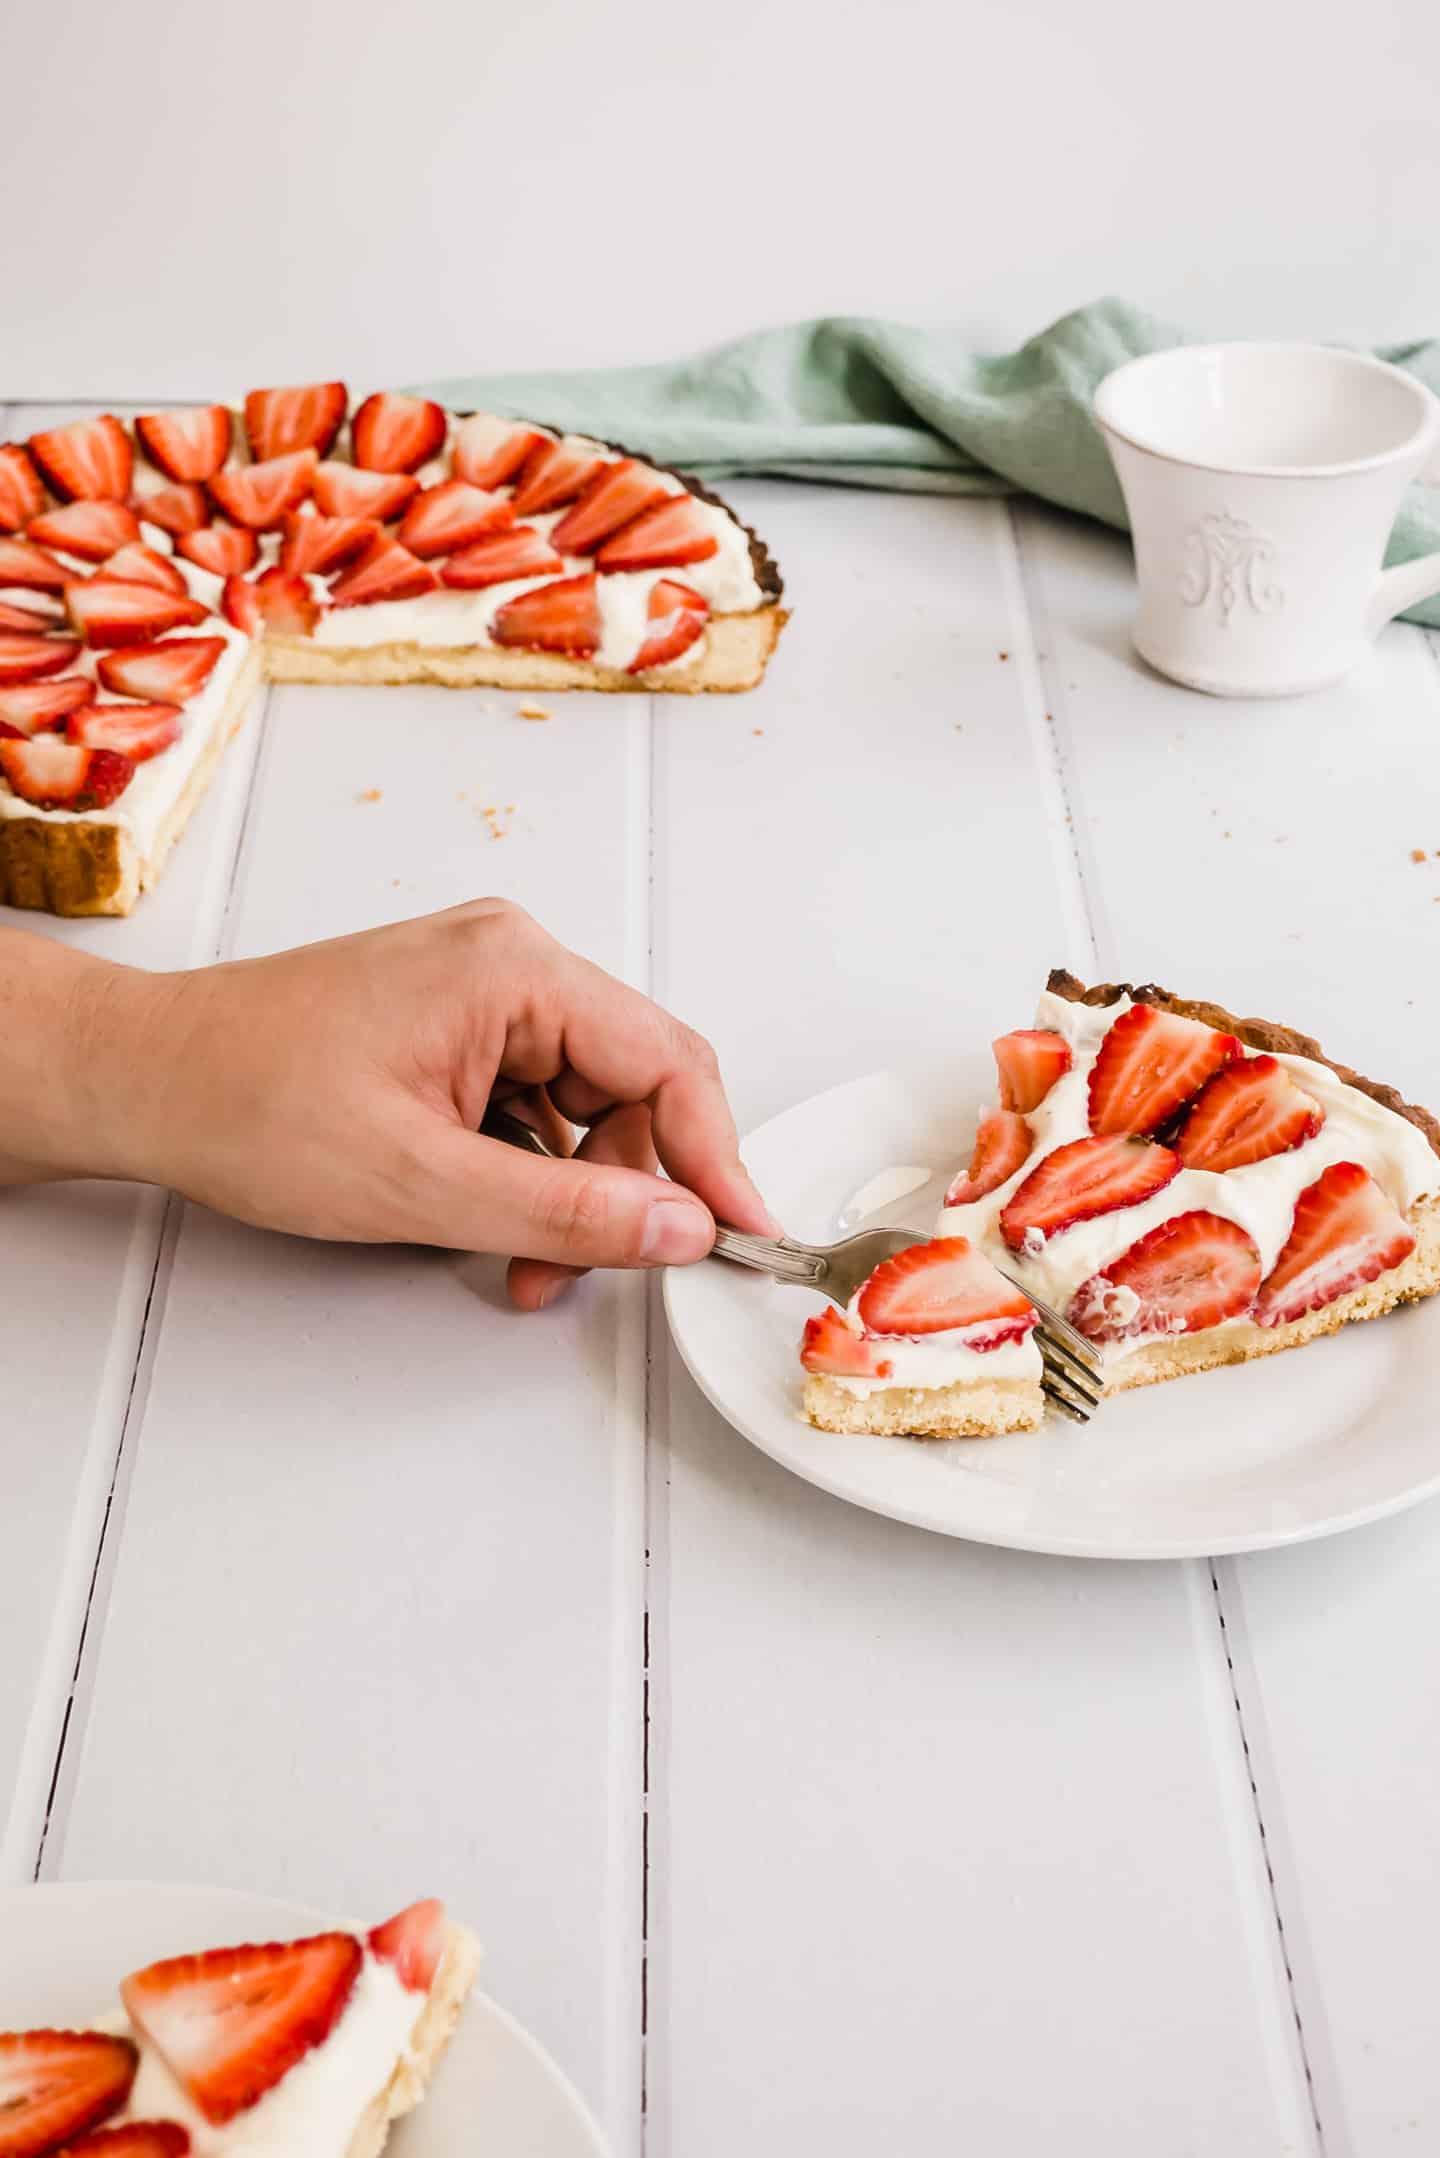 Nothing beats a traditional Strawberry and Cream Tart at the moment of dessert. Simple as a buttery shortbread crust, smooth creamy filling and a fresh strawberry topping.